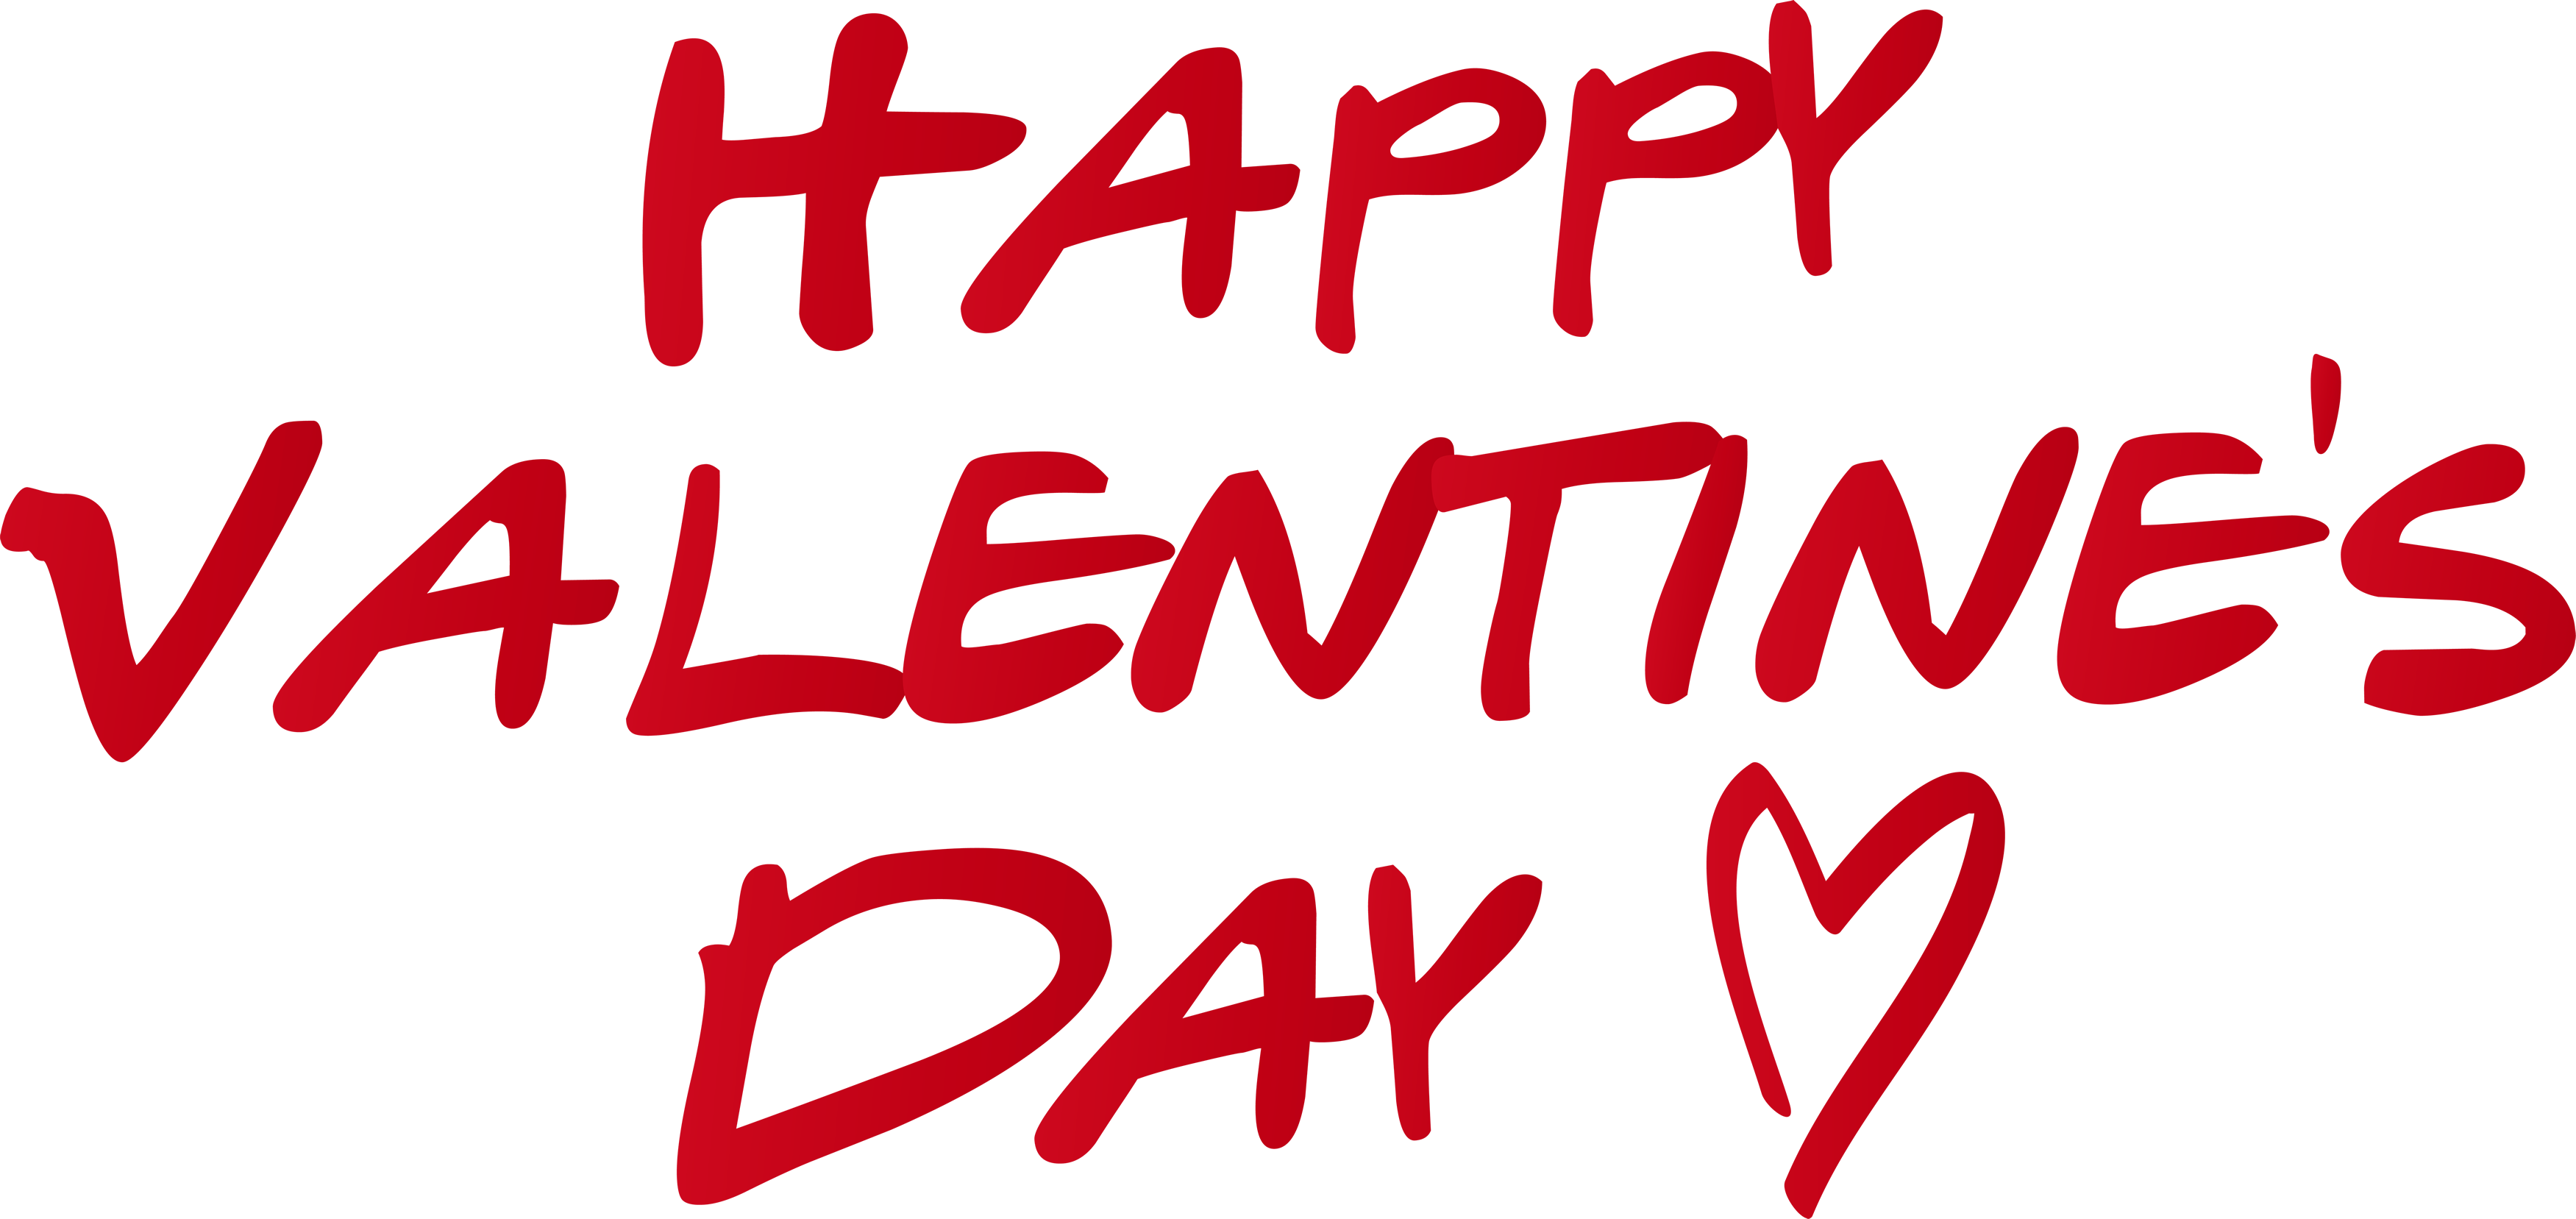 Valentines Day PNG Free Download